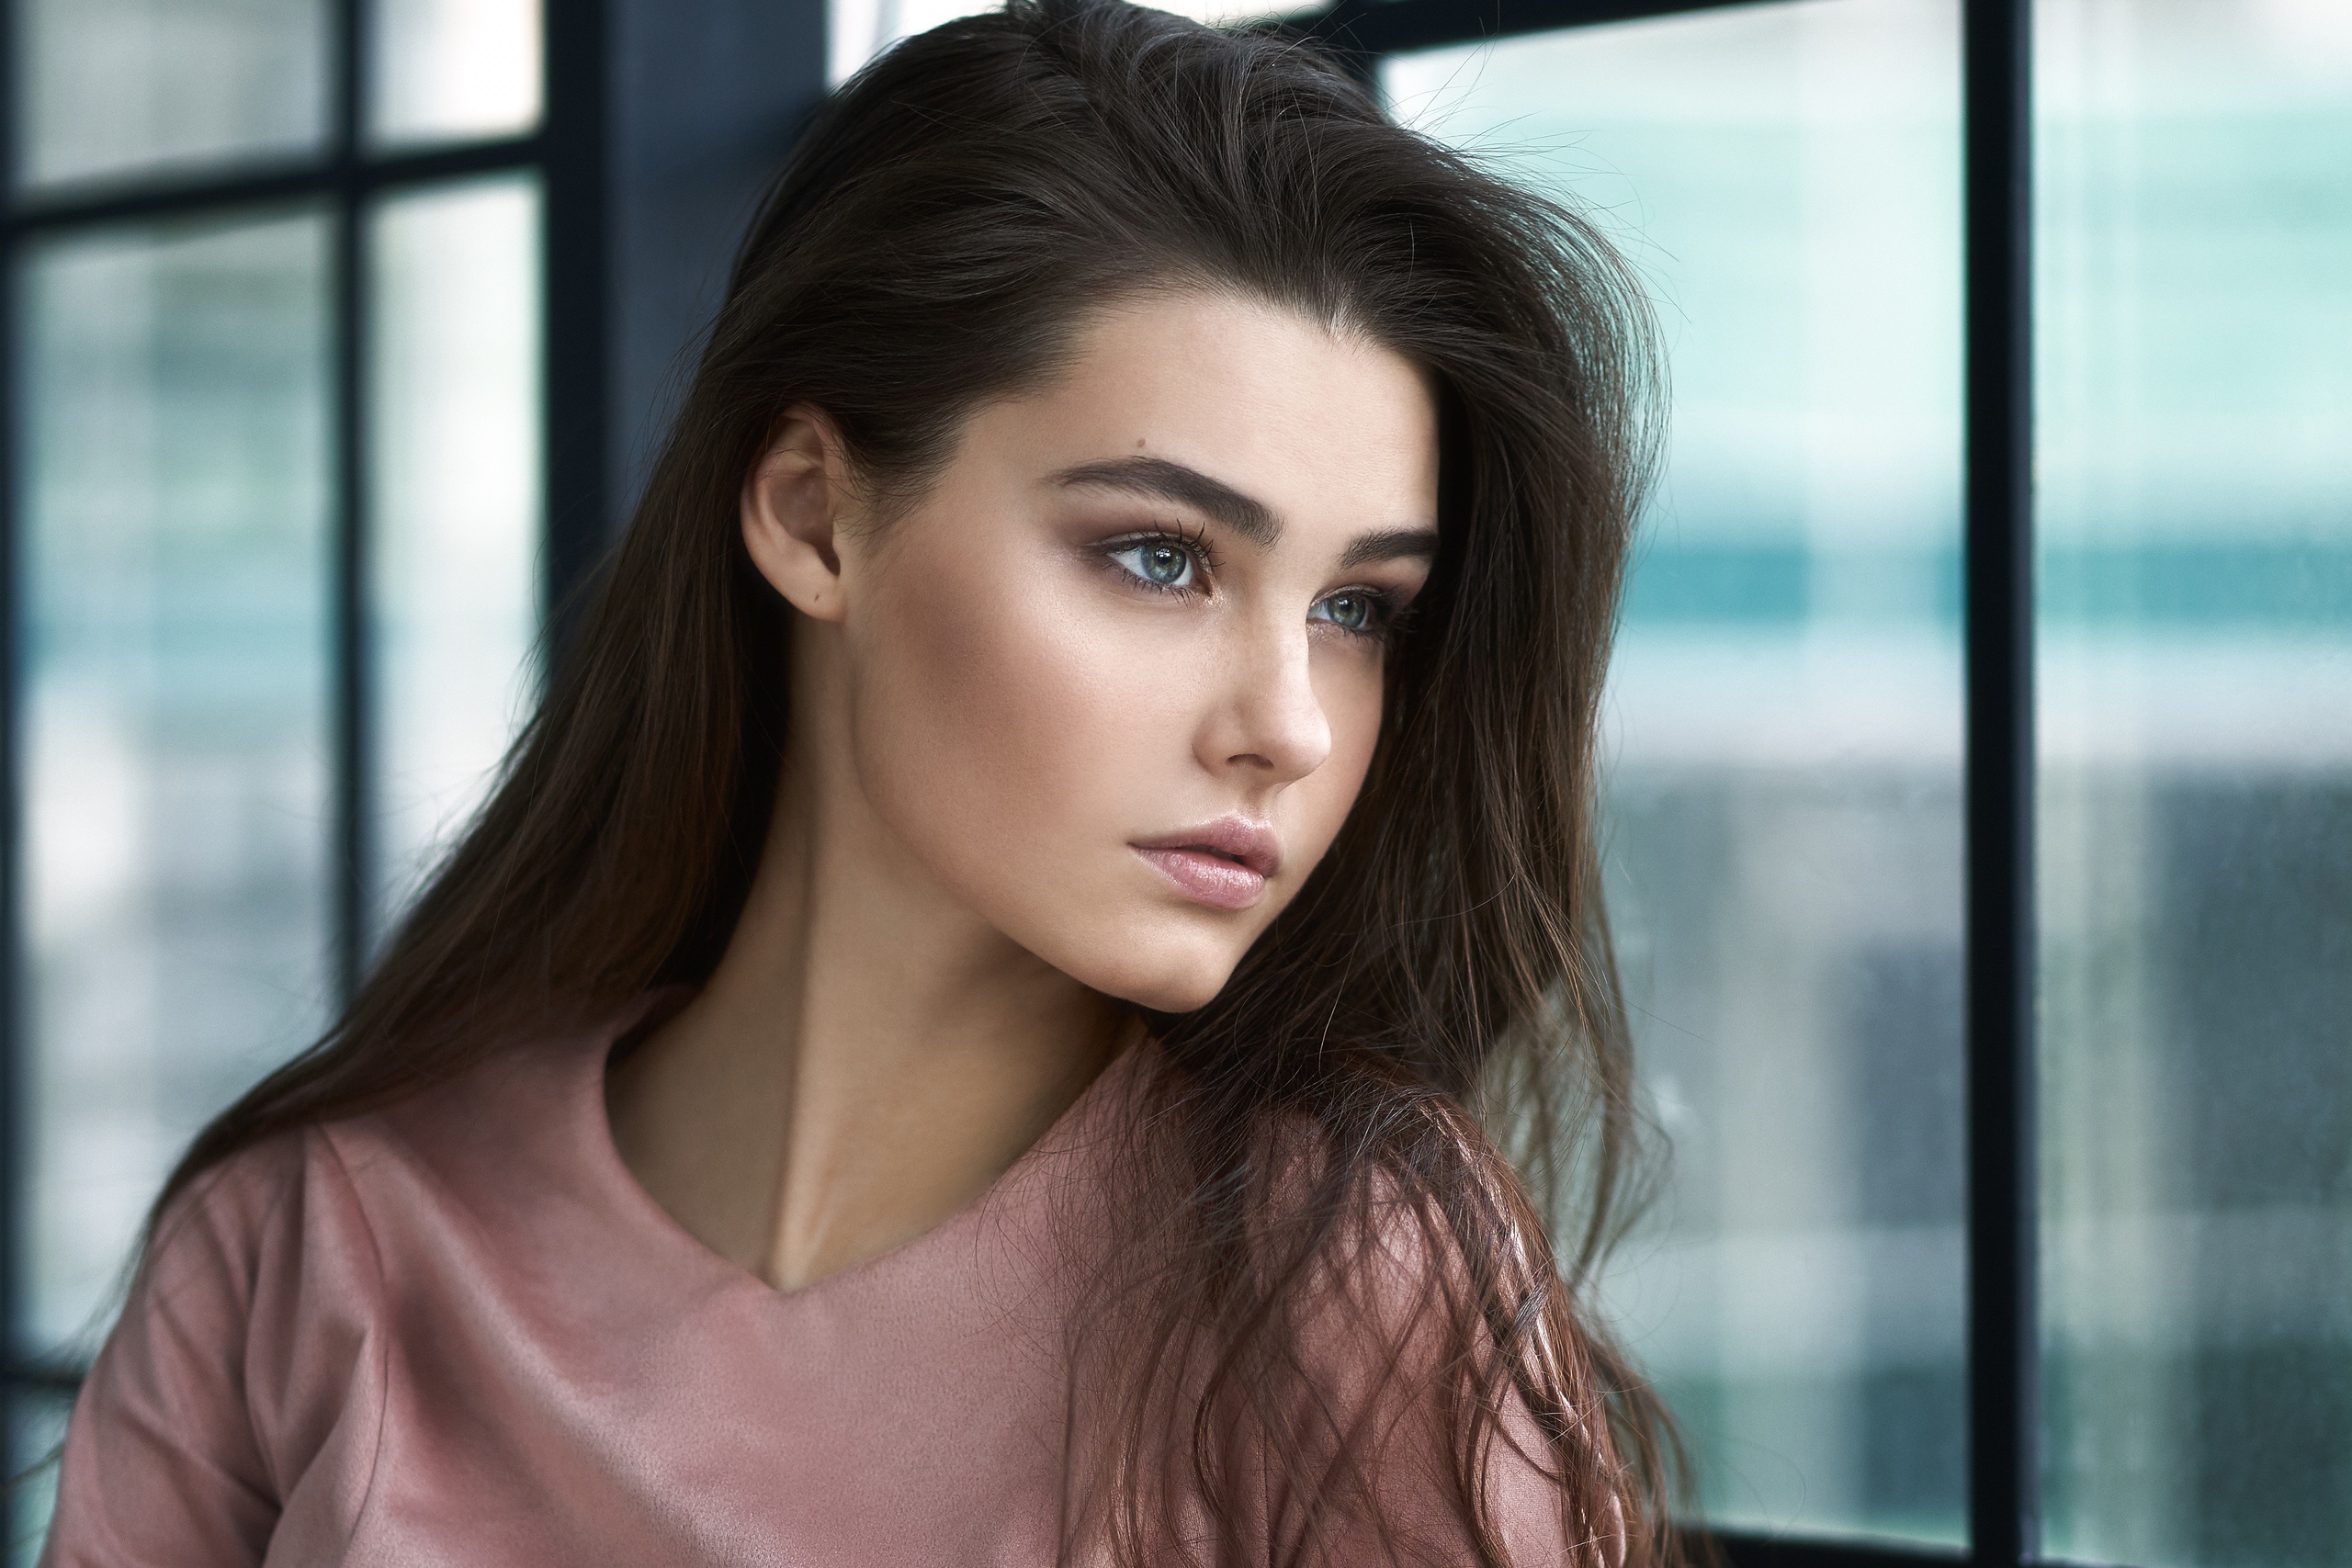 Women Model Portrait Face Dark Hair Women Indoors Pink Sweater Sweater Looking Into The Distance Pin 2560x1707